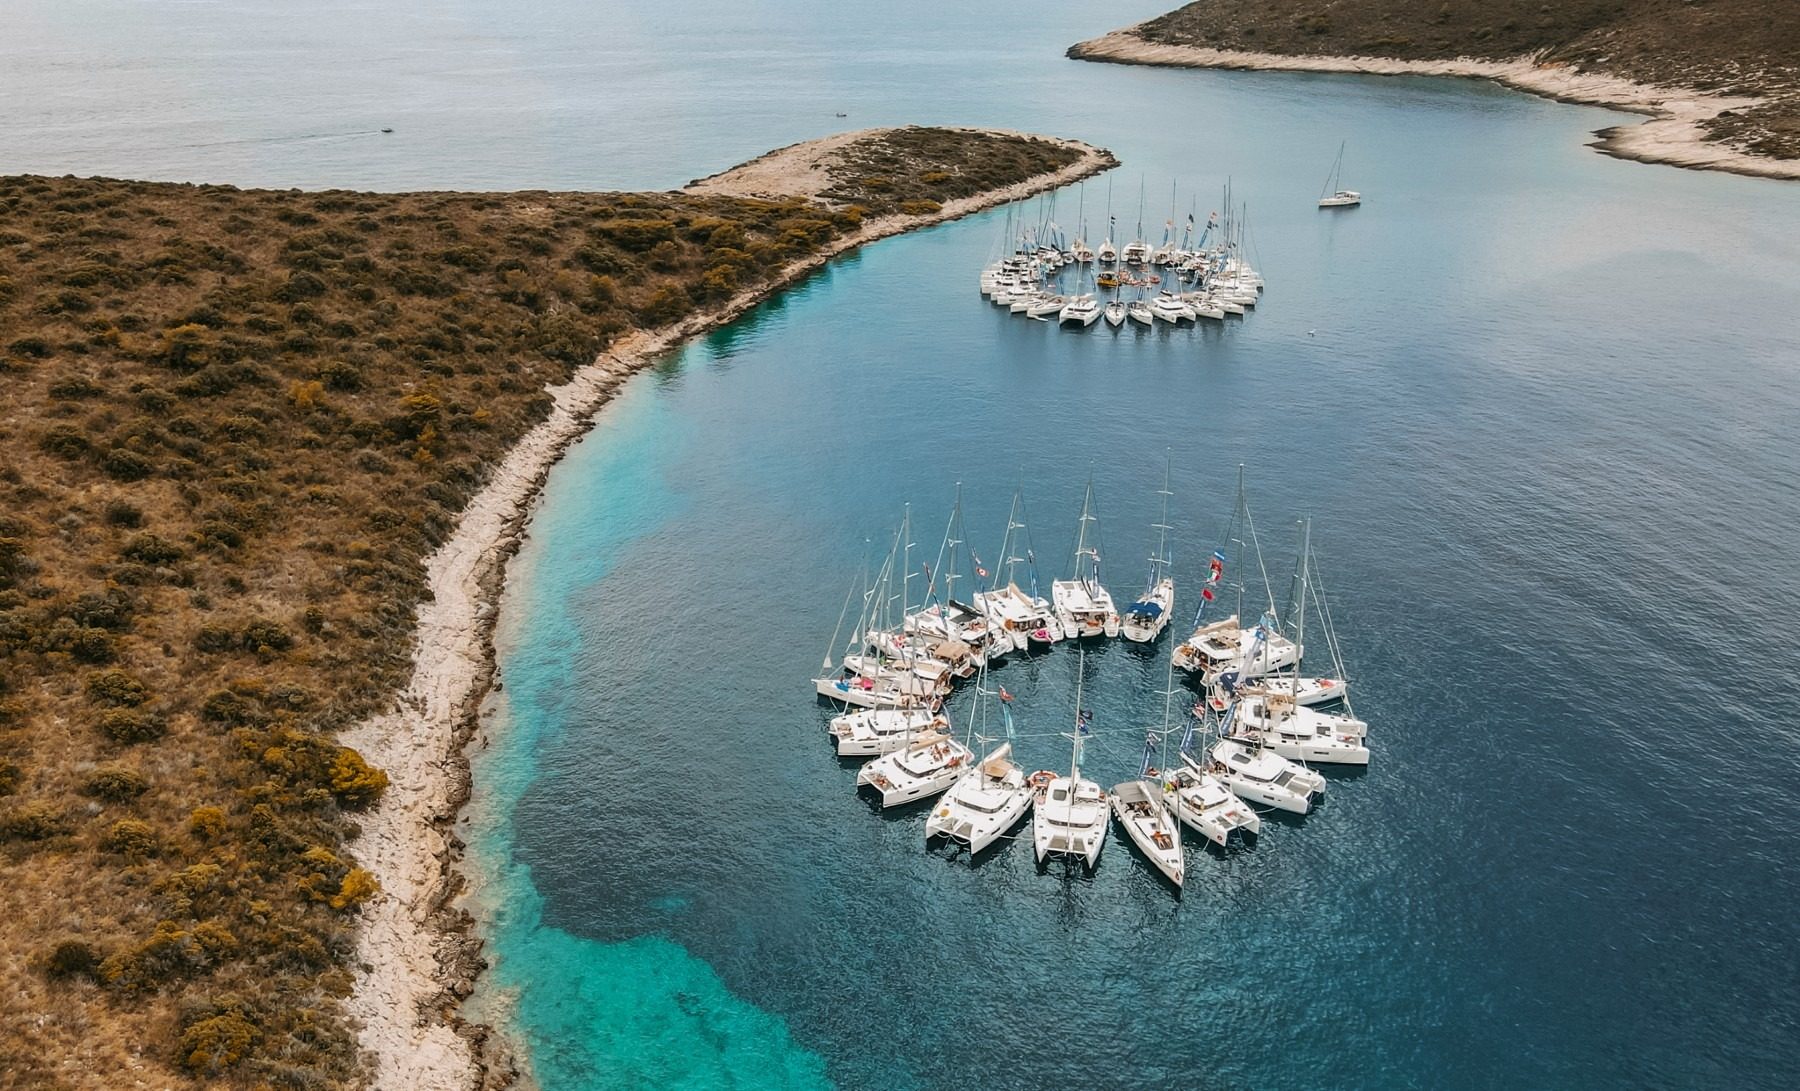 How Does The Yacht Week Work? The Yacht Week